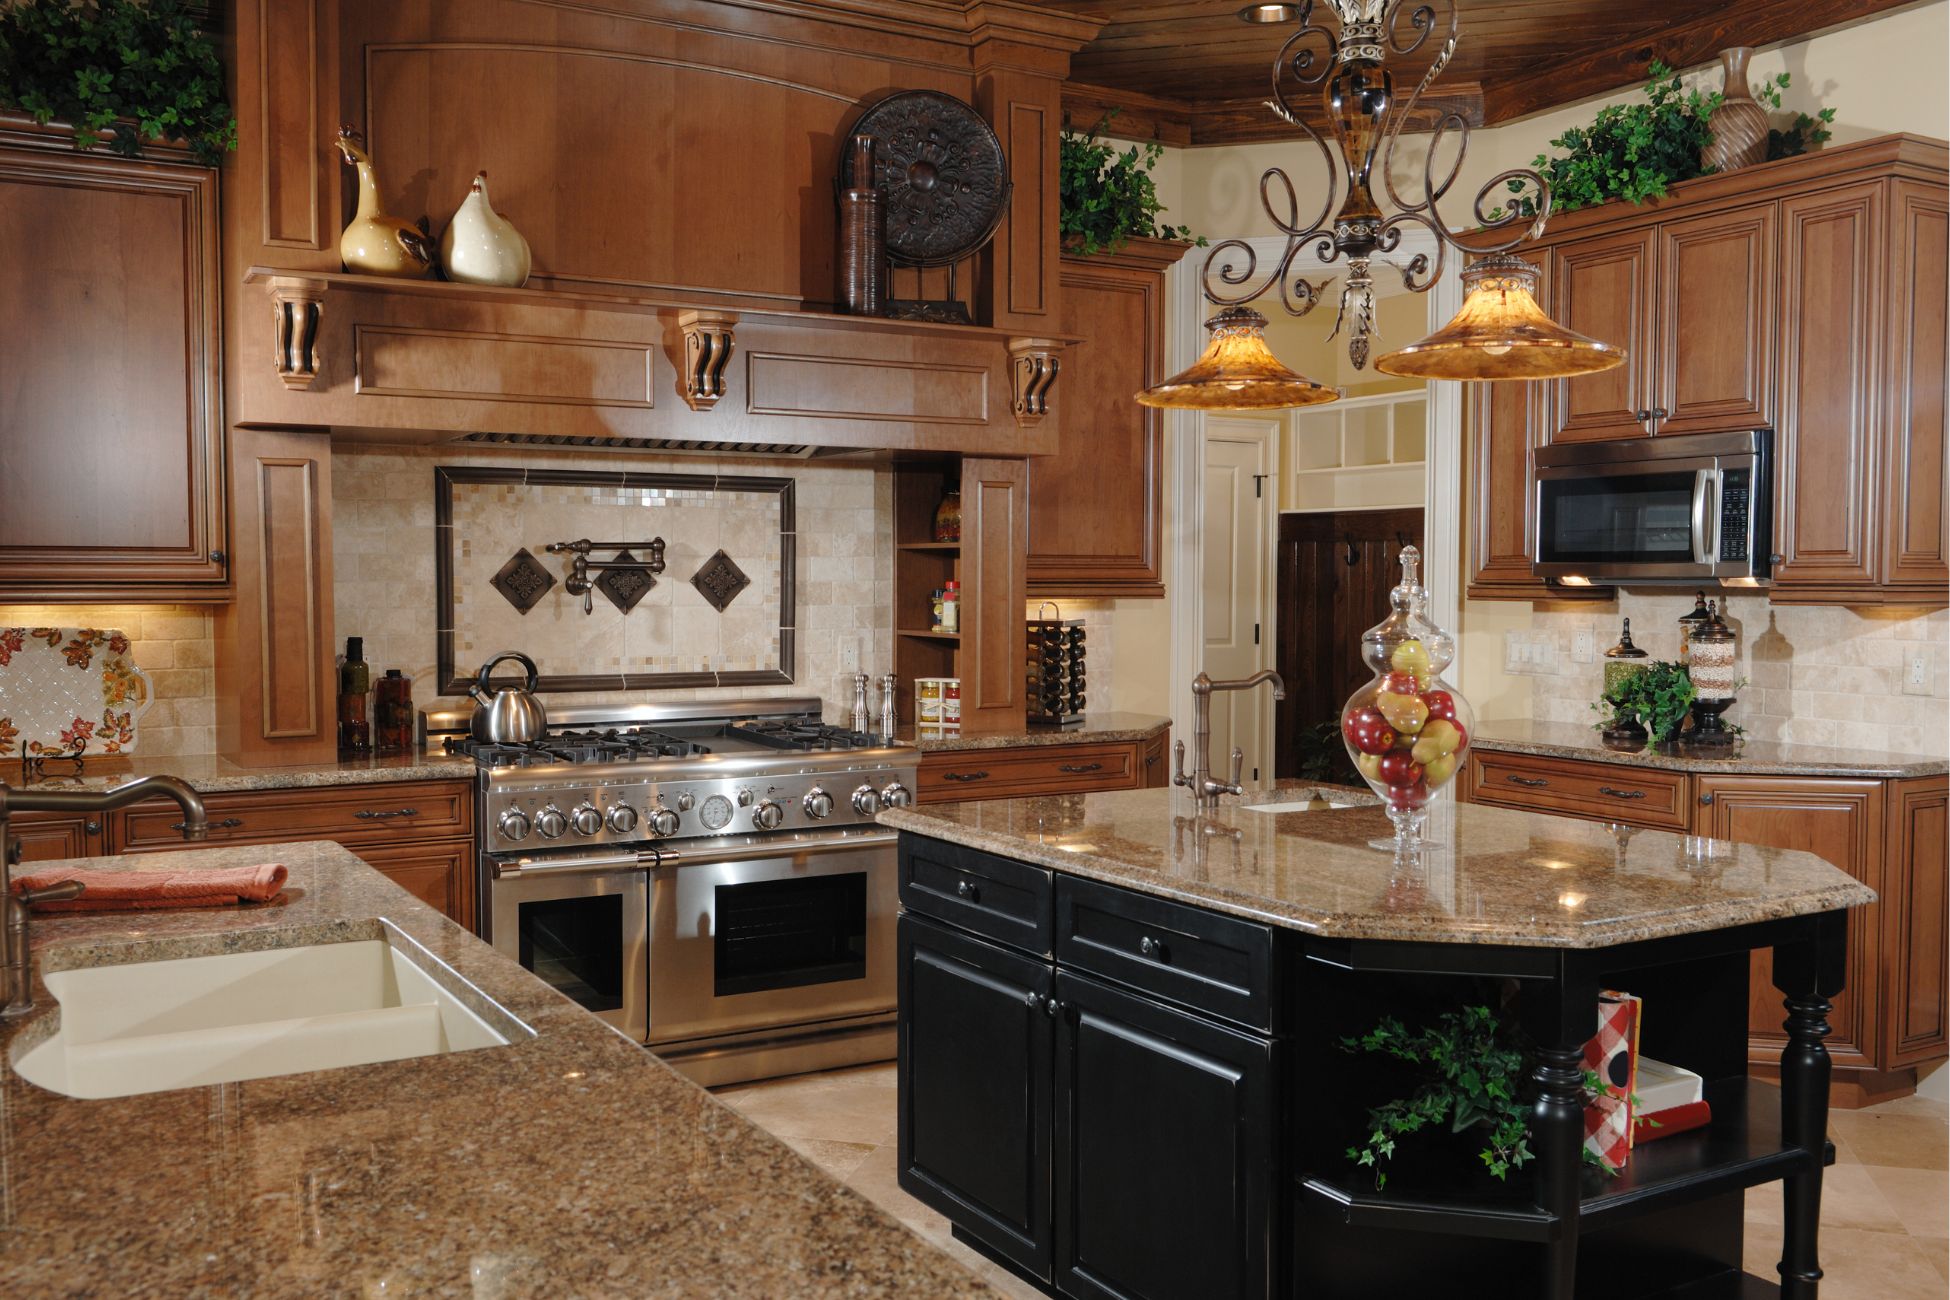 Traditional kitchen with laminated countertop